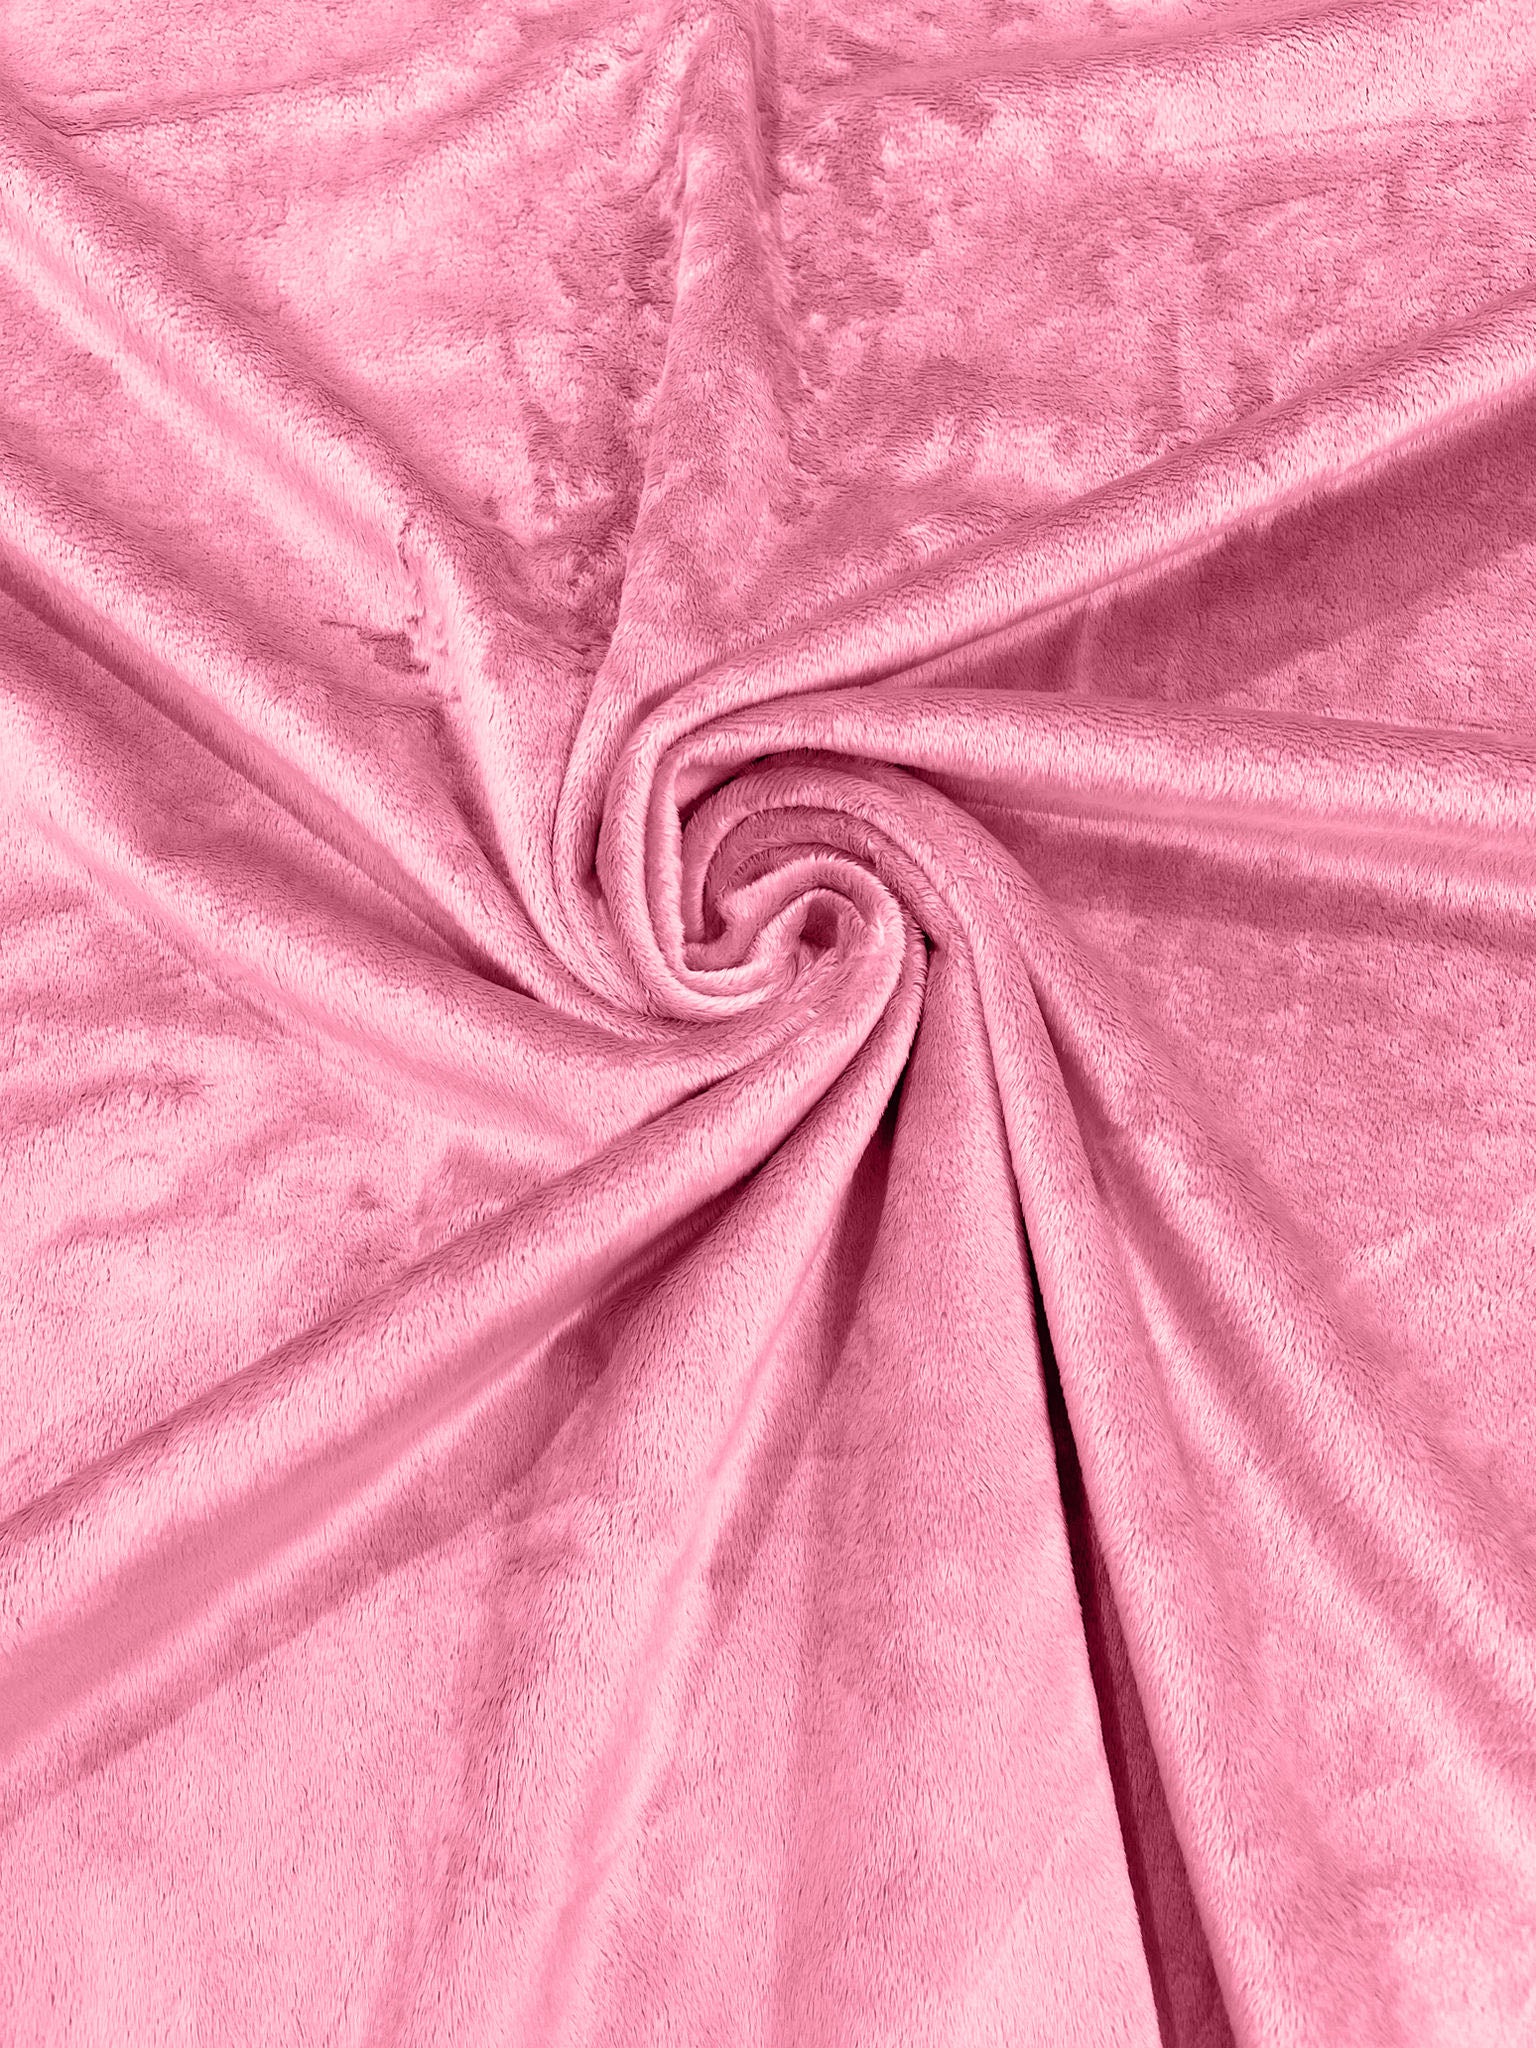 Pink Minky Smooth Soft Solid Plush Faux Fake Fur Fabric Polyester- Sold by the yard.